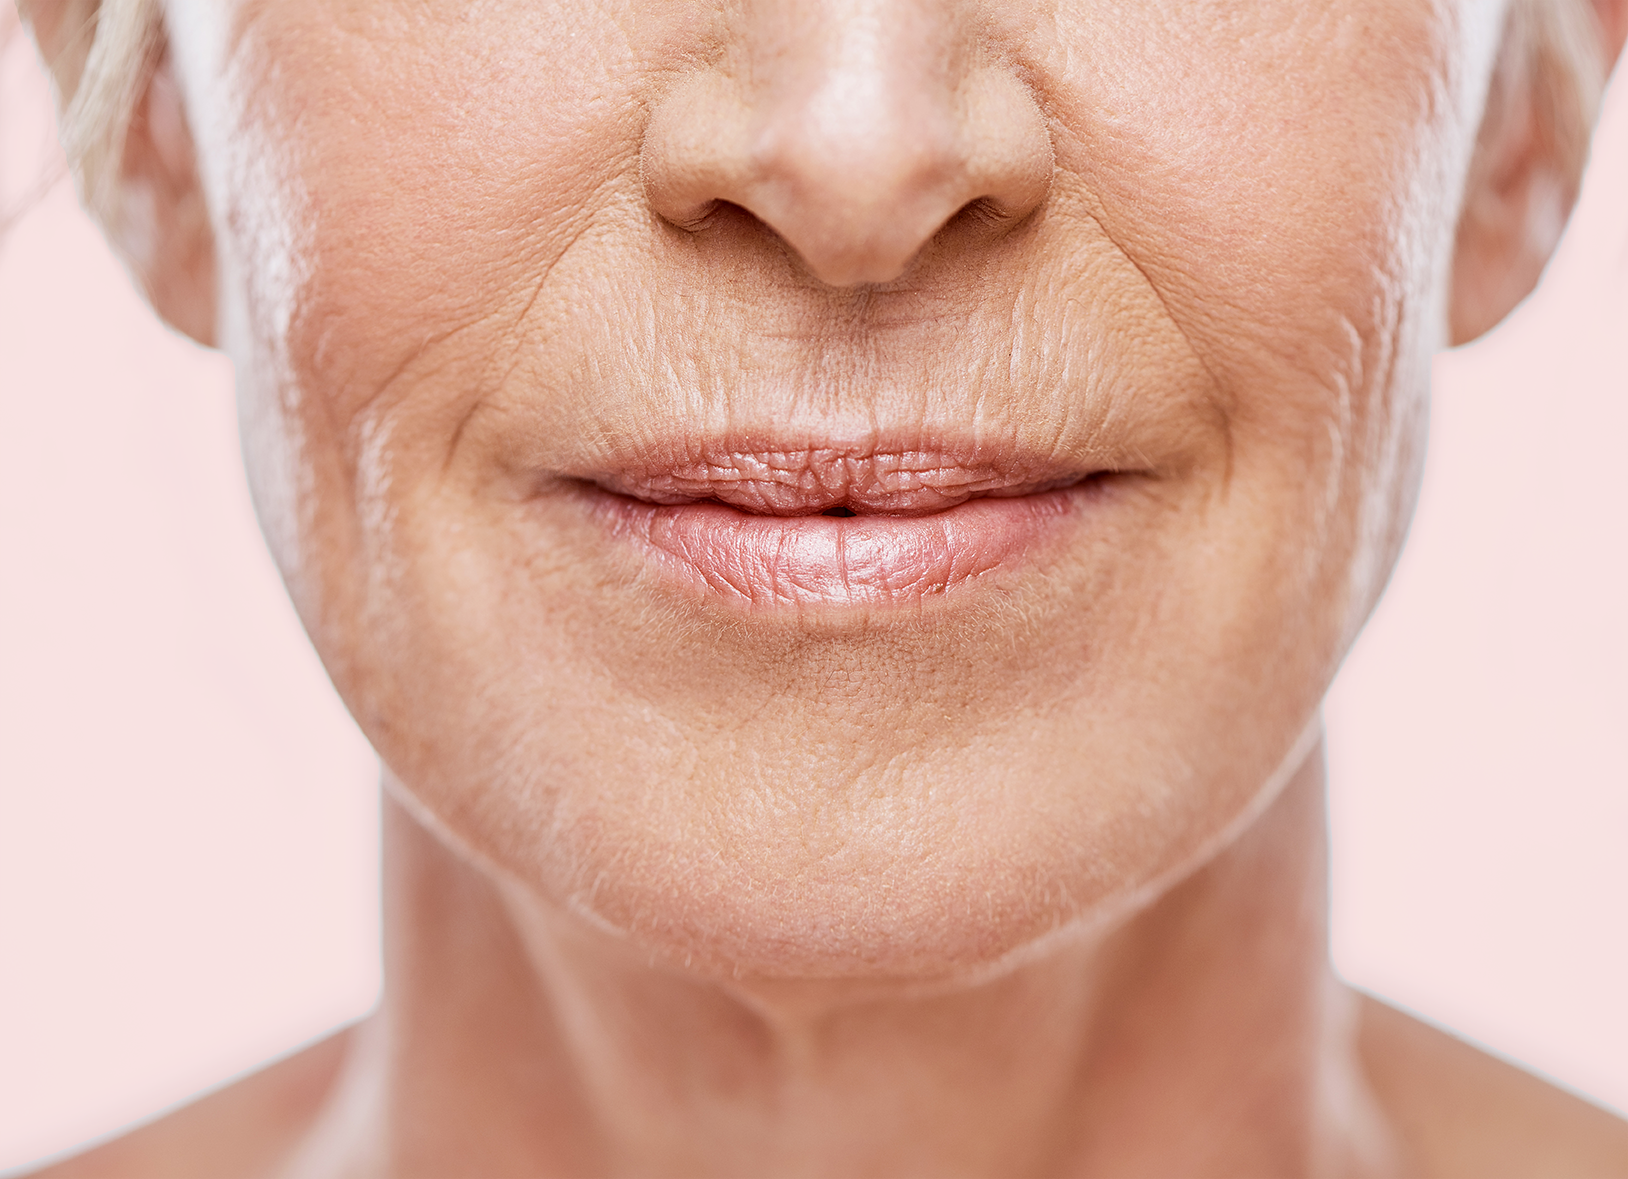 How to prevent the appearance of wrinkles